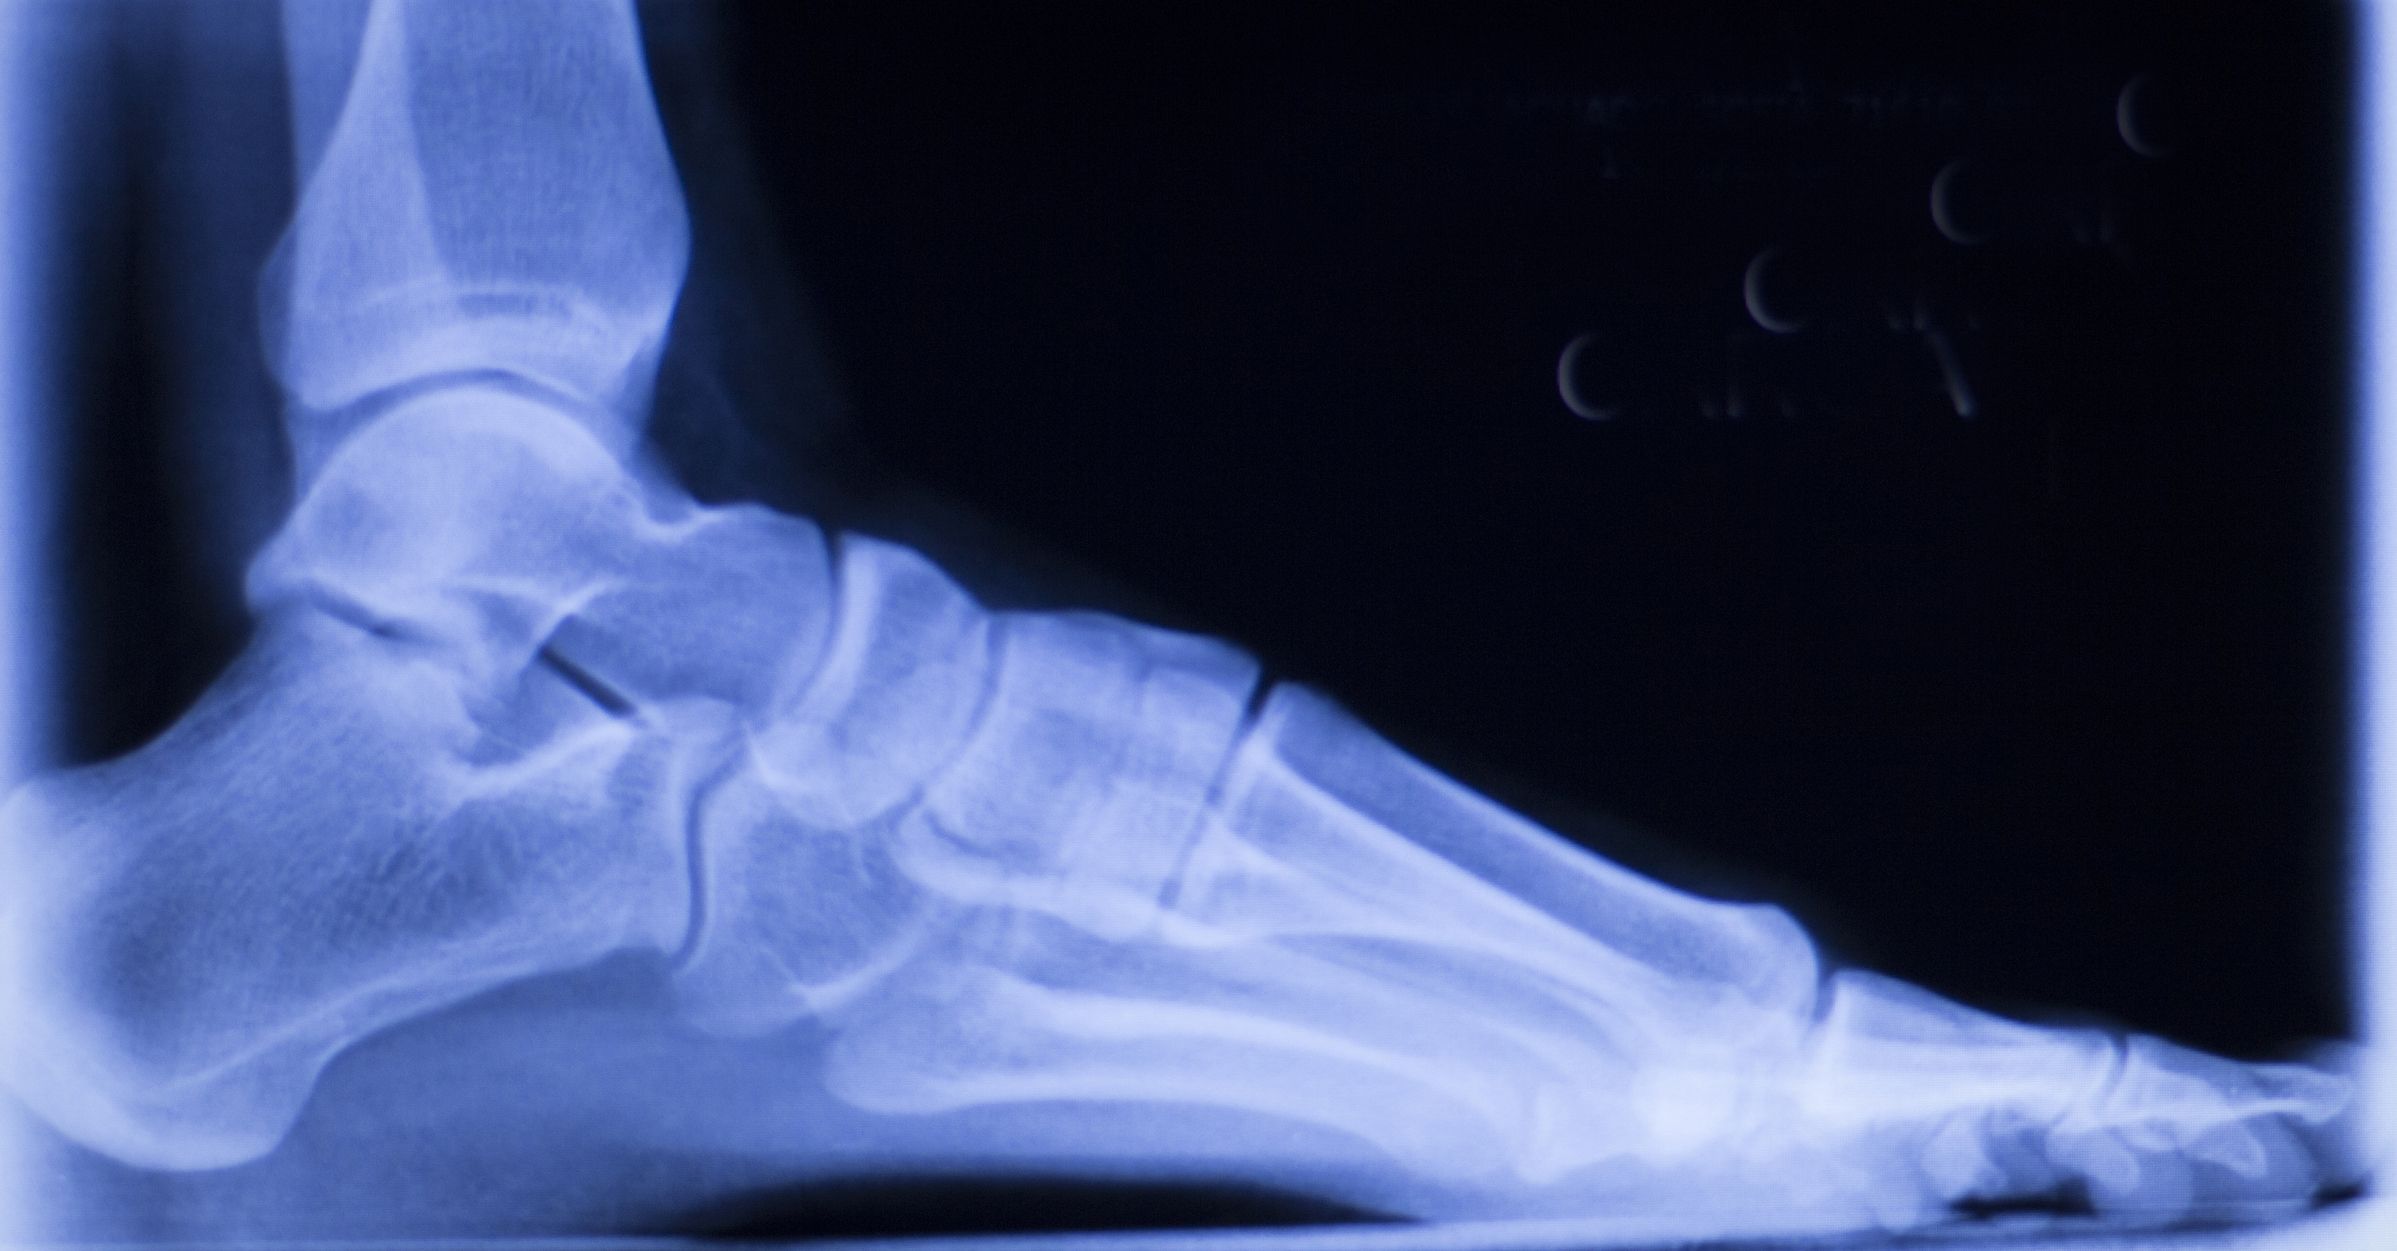 An x-ray depicts the bones in a patient's foot/ankle region.